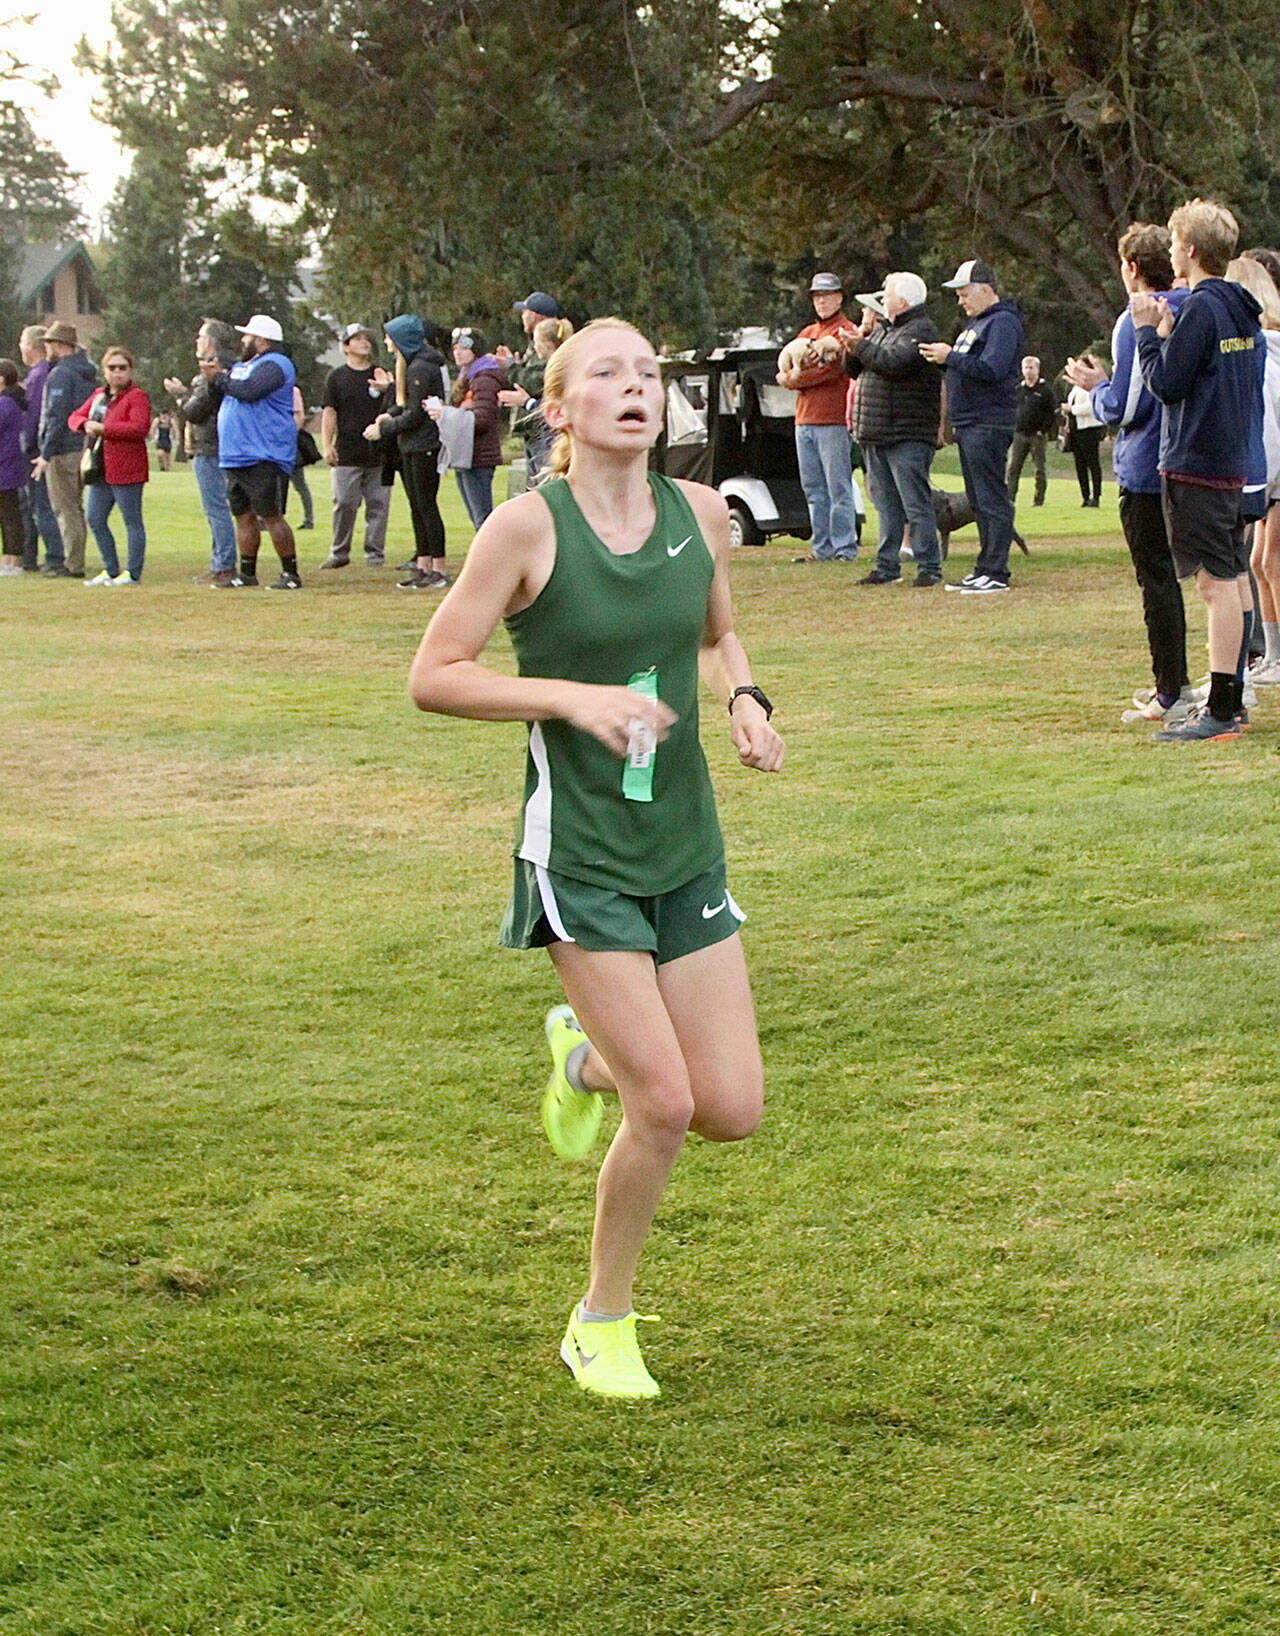 Leia Larson of Port Angeles, a freshman, was the top PA finisher coming in 13th place. dkogan